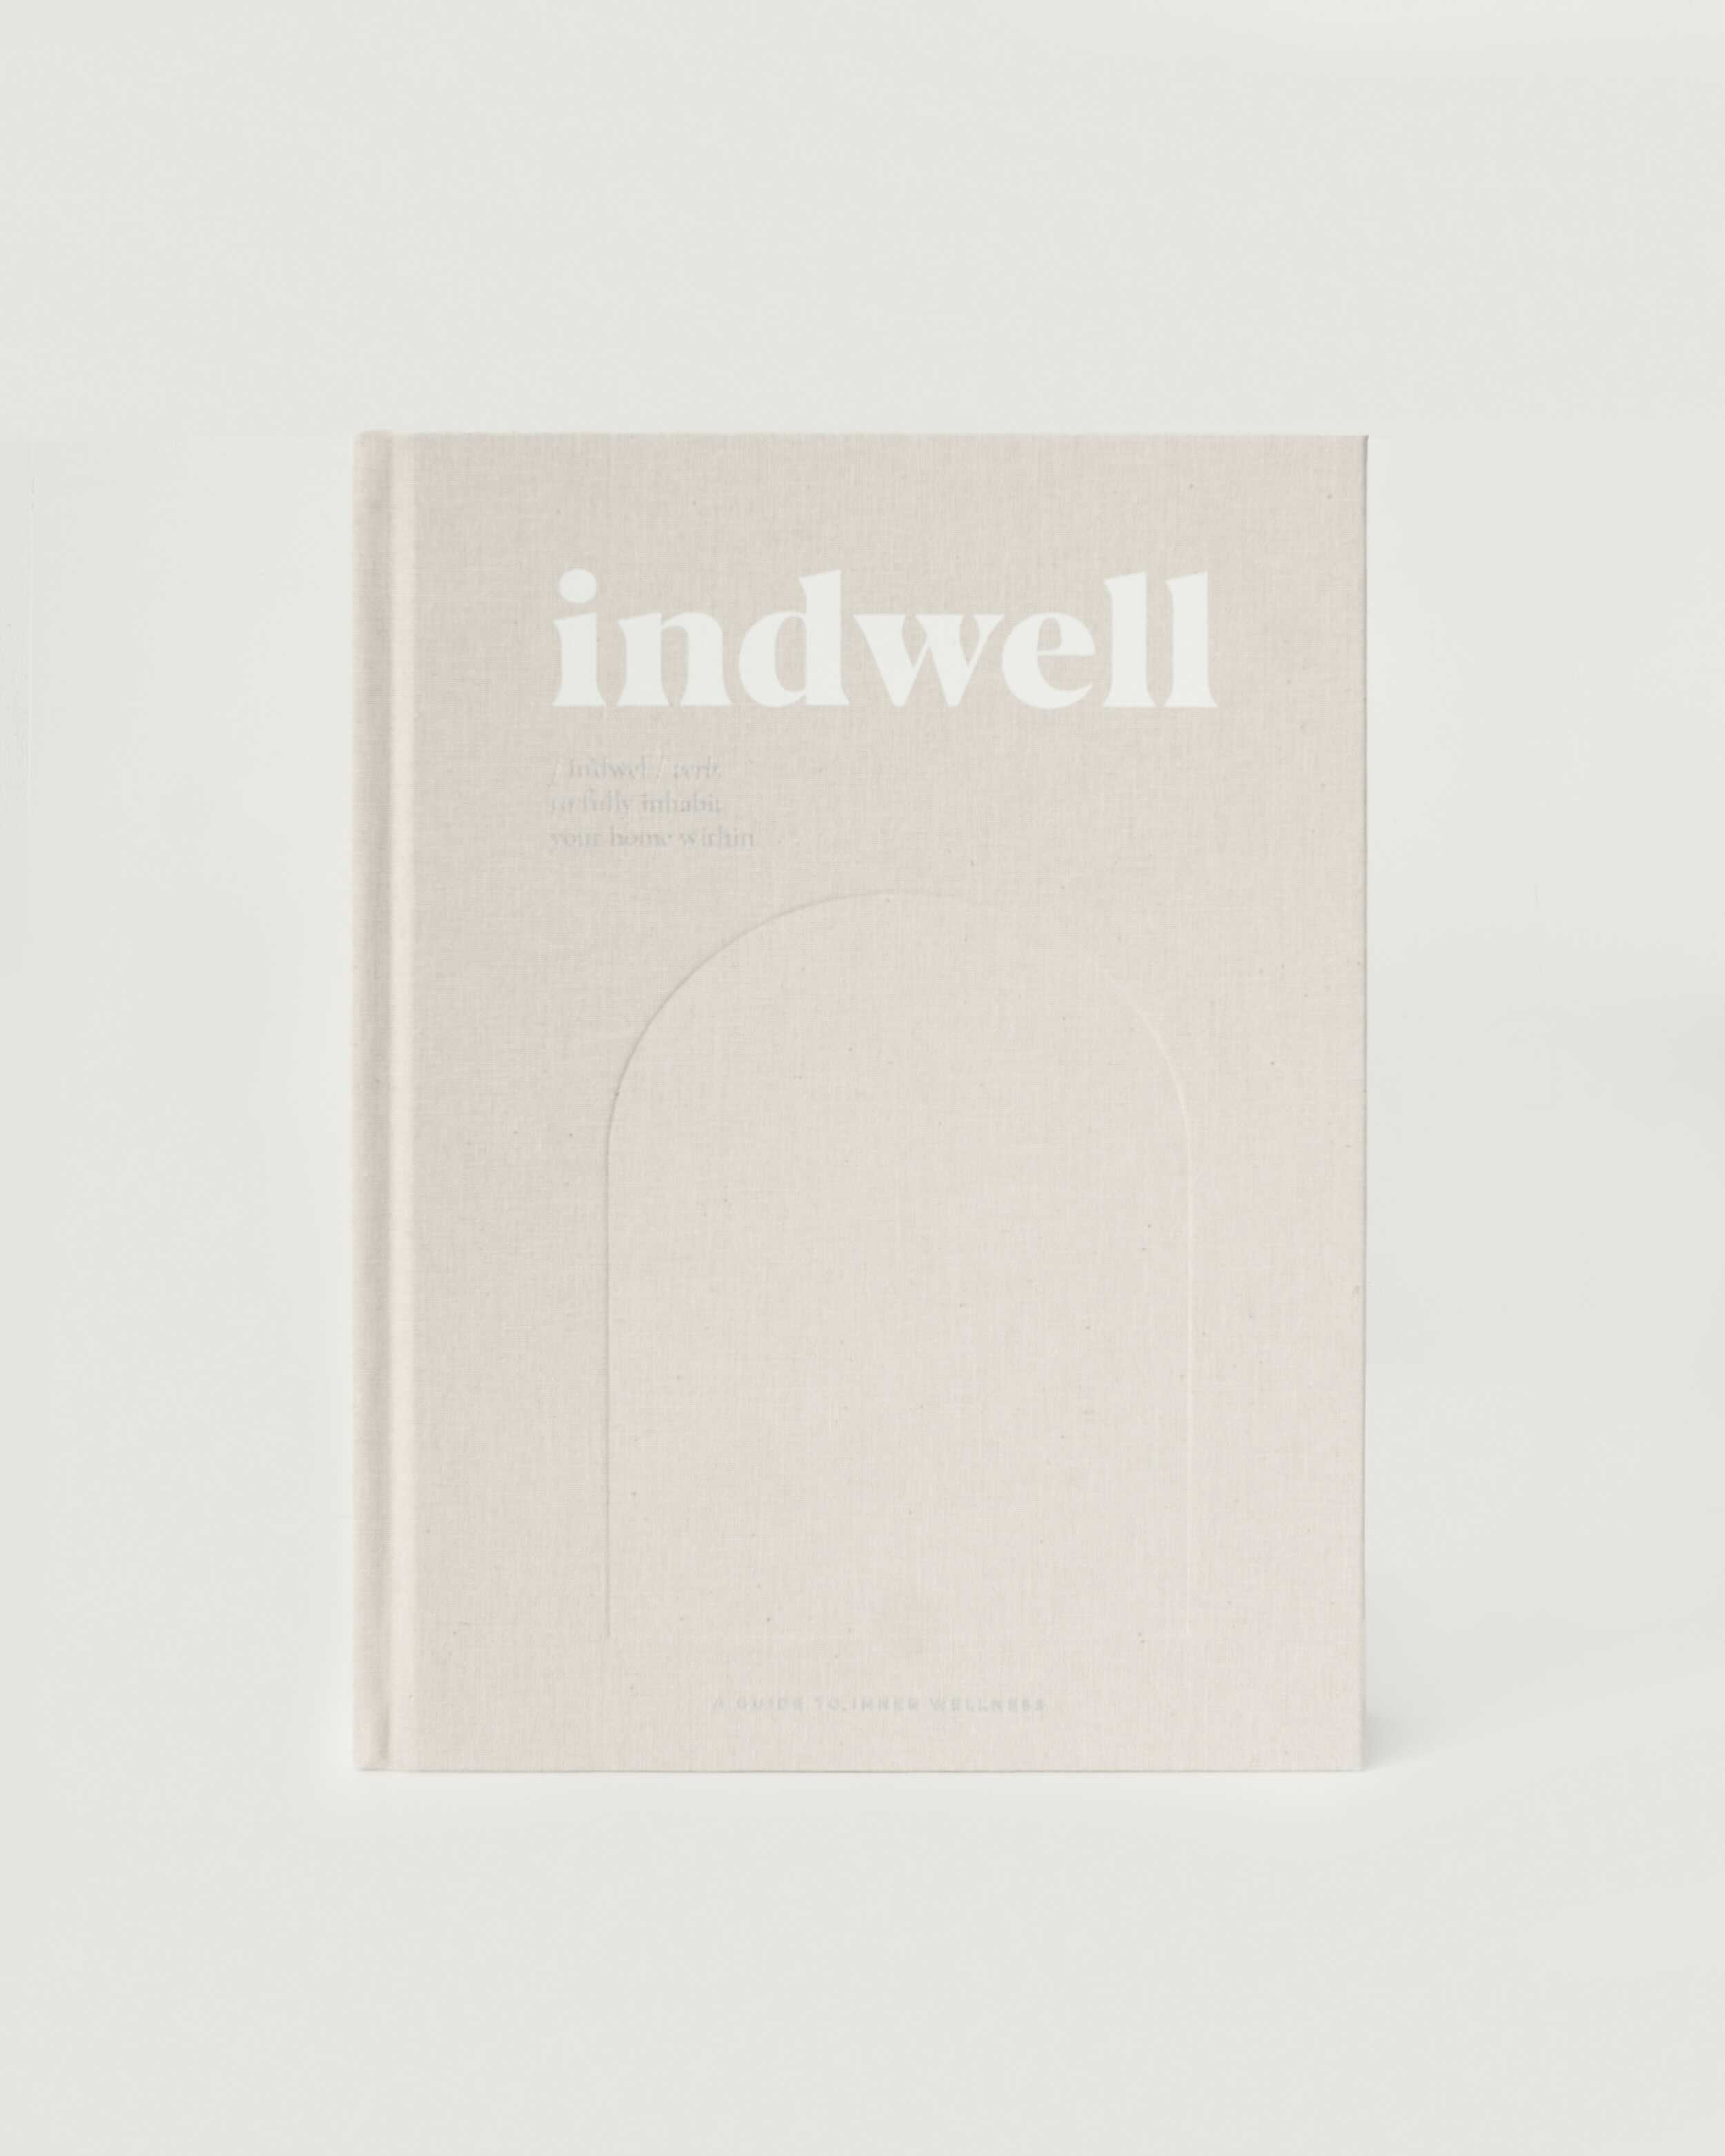 The Indwell Guide